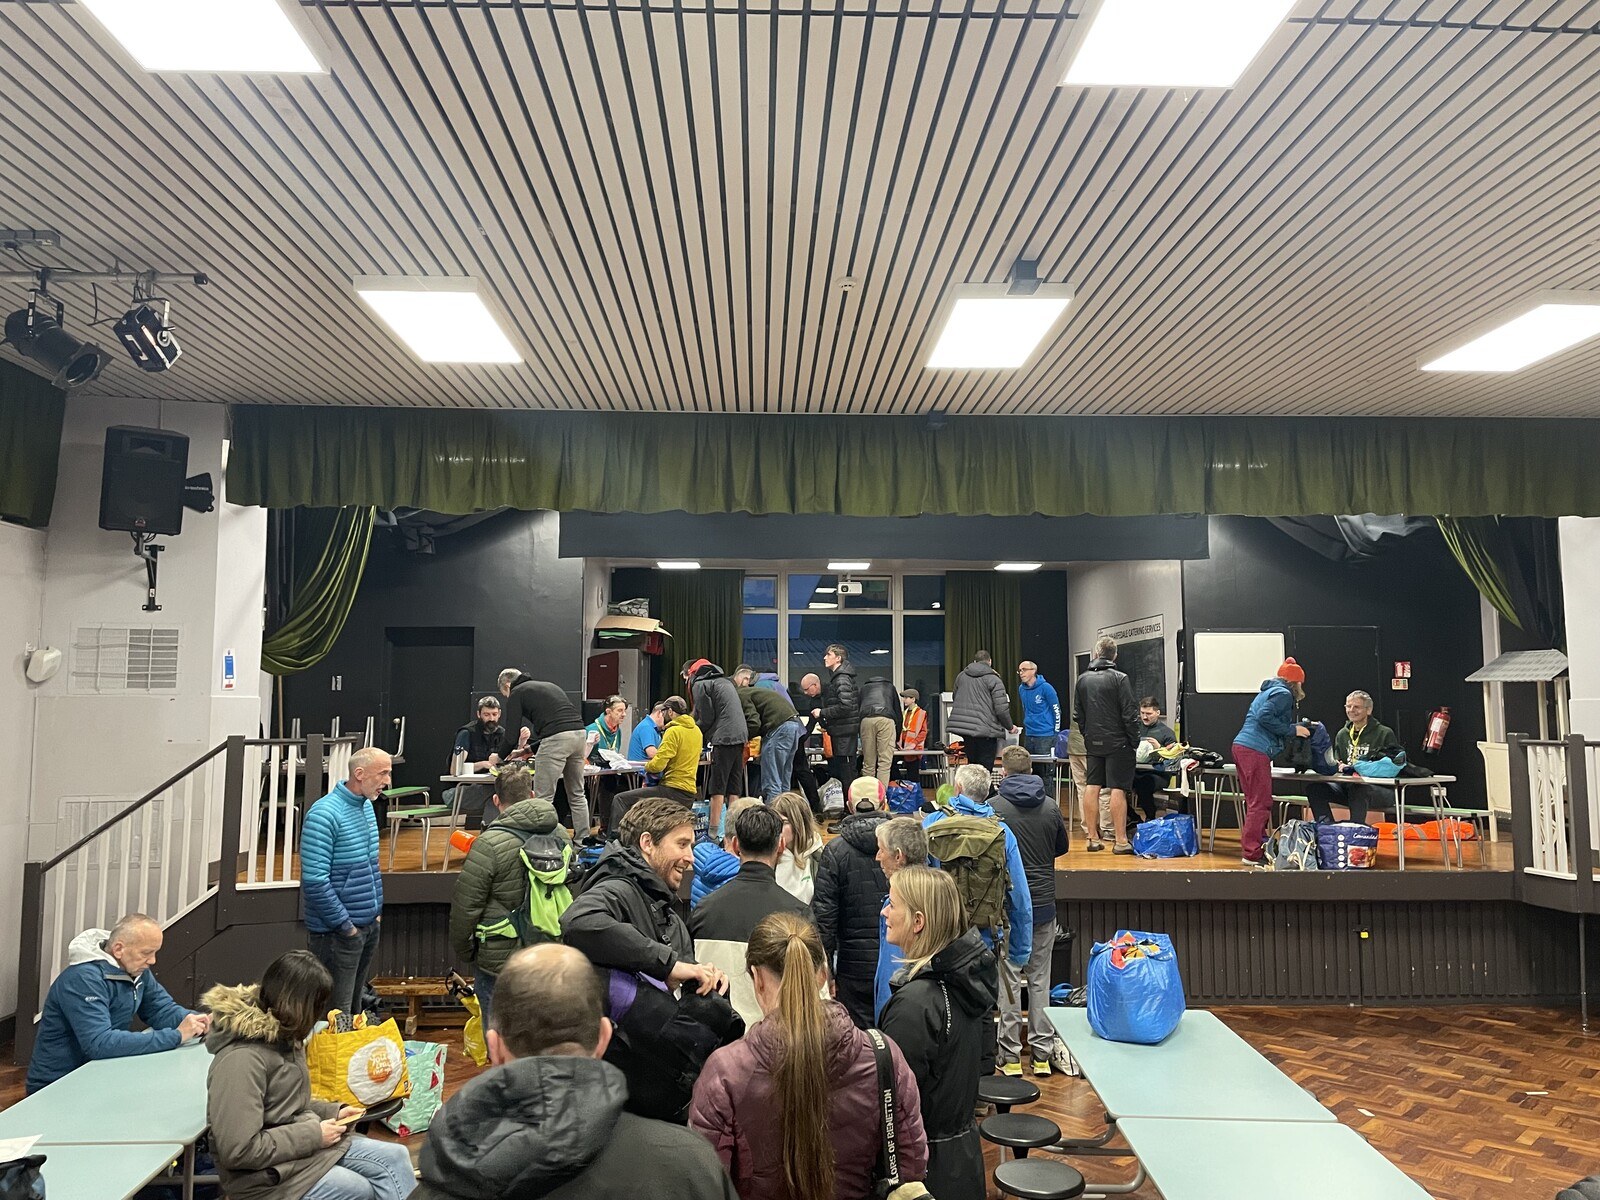 Runners waiting in the queue for kit check, up on the stage of the school hall.